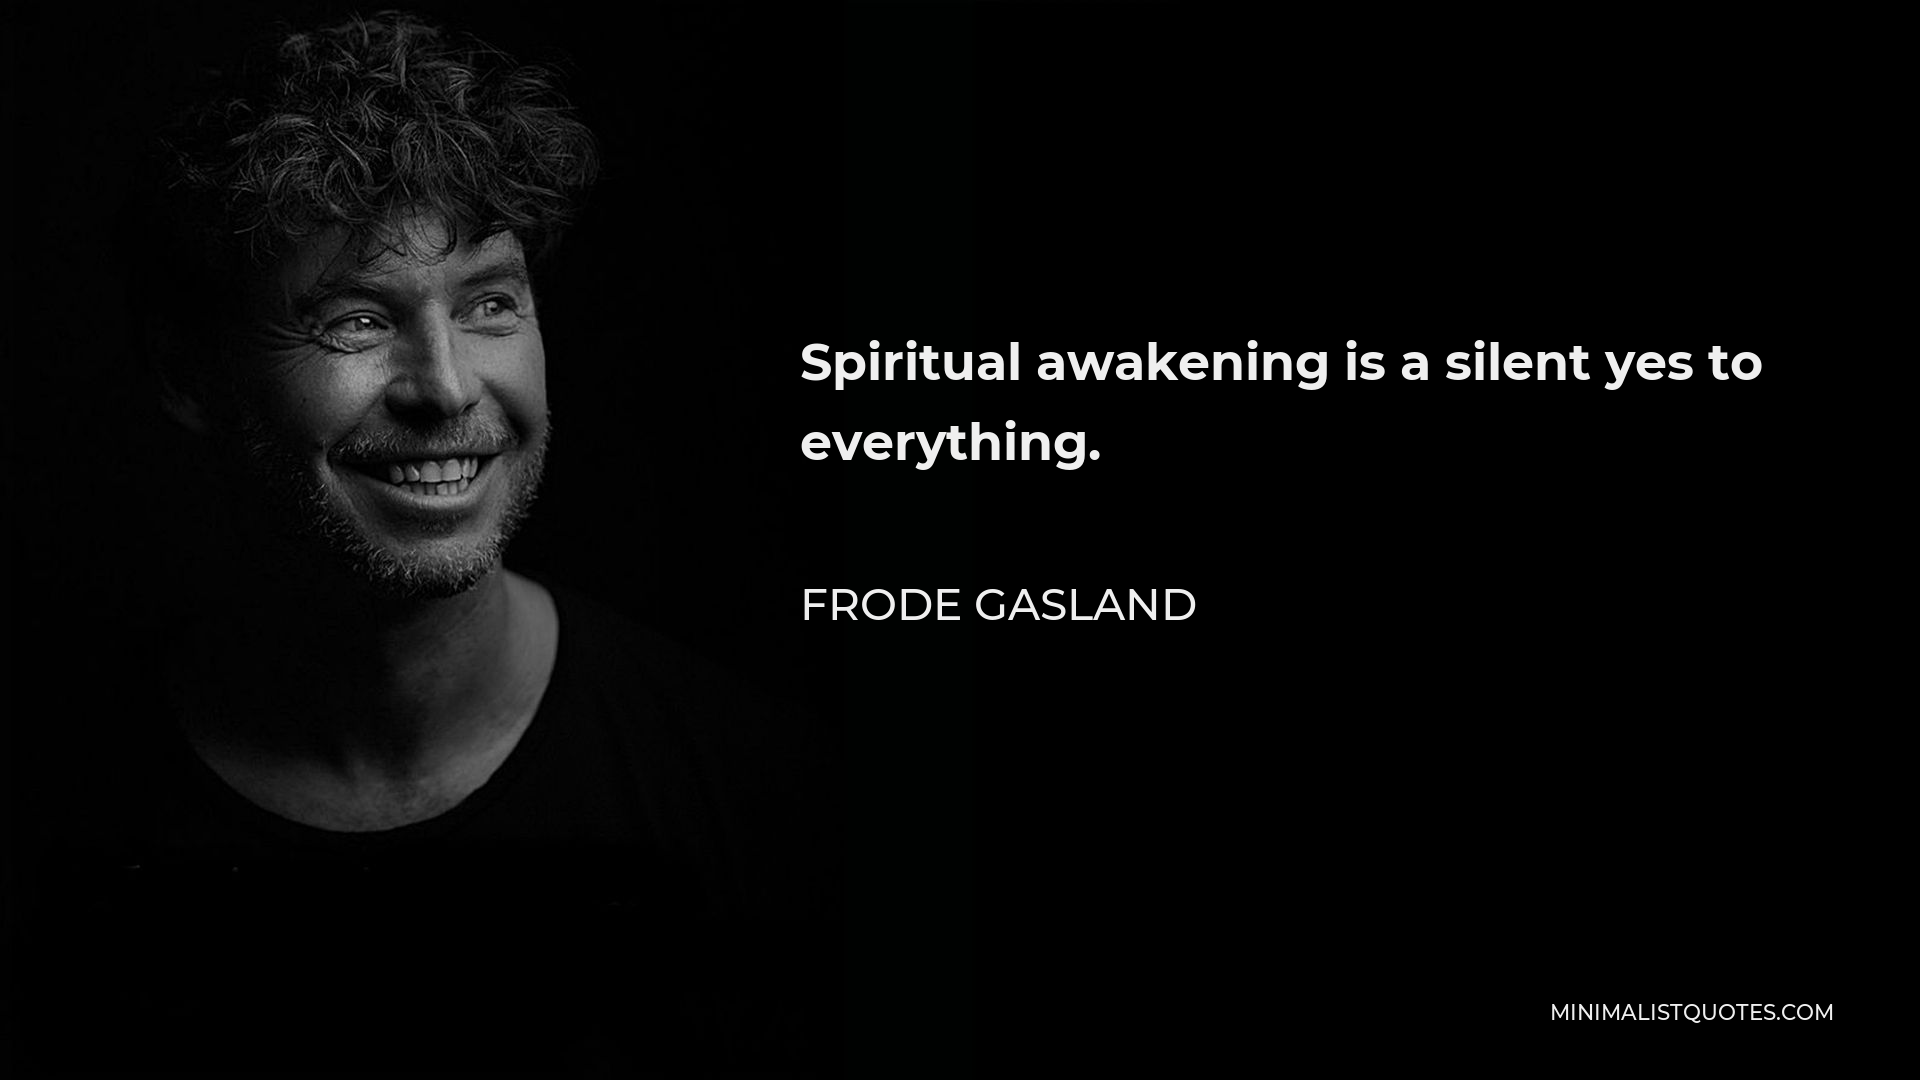 Frode Gasland Quote - Spiritual awakening is a silent yes to everything.